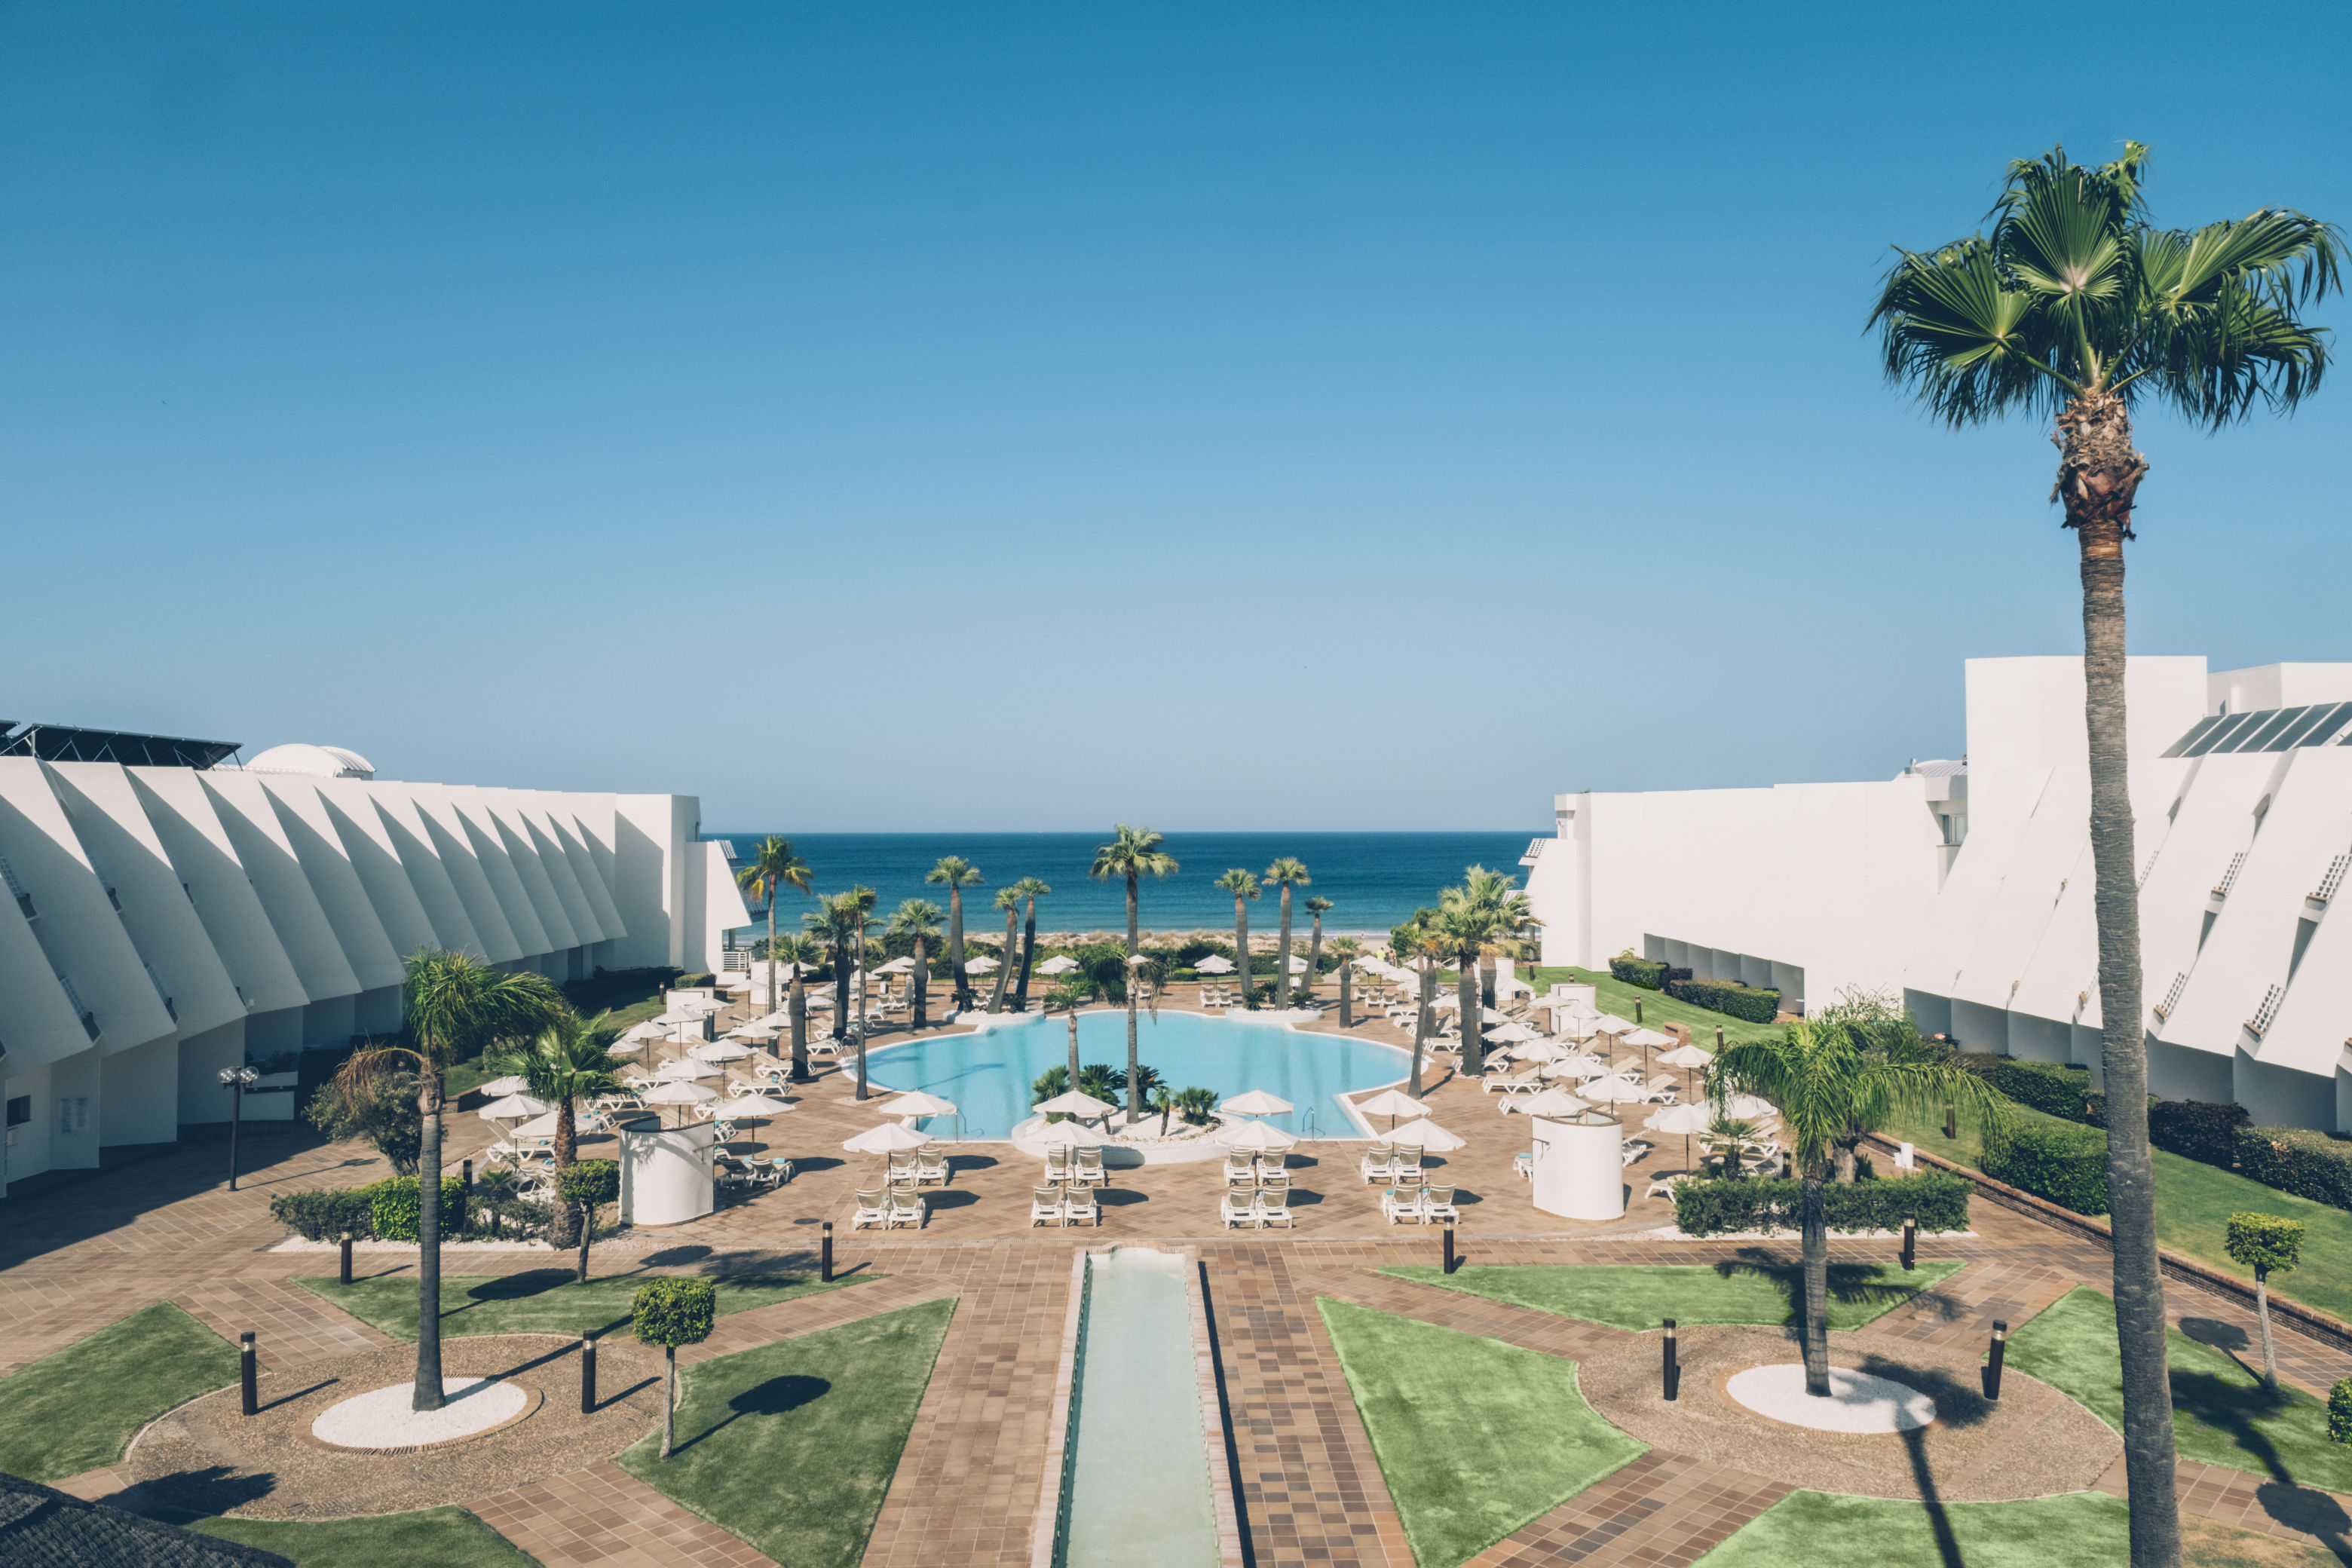 Discover Iberostar Royal Andalus, located on the best access to La Barrosa beach